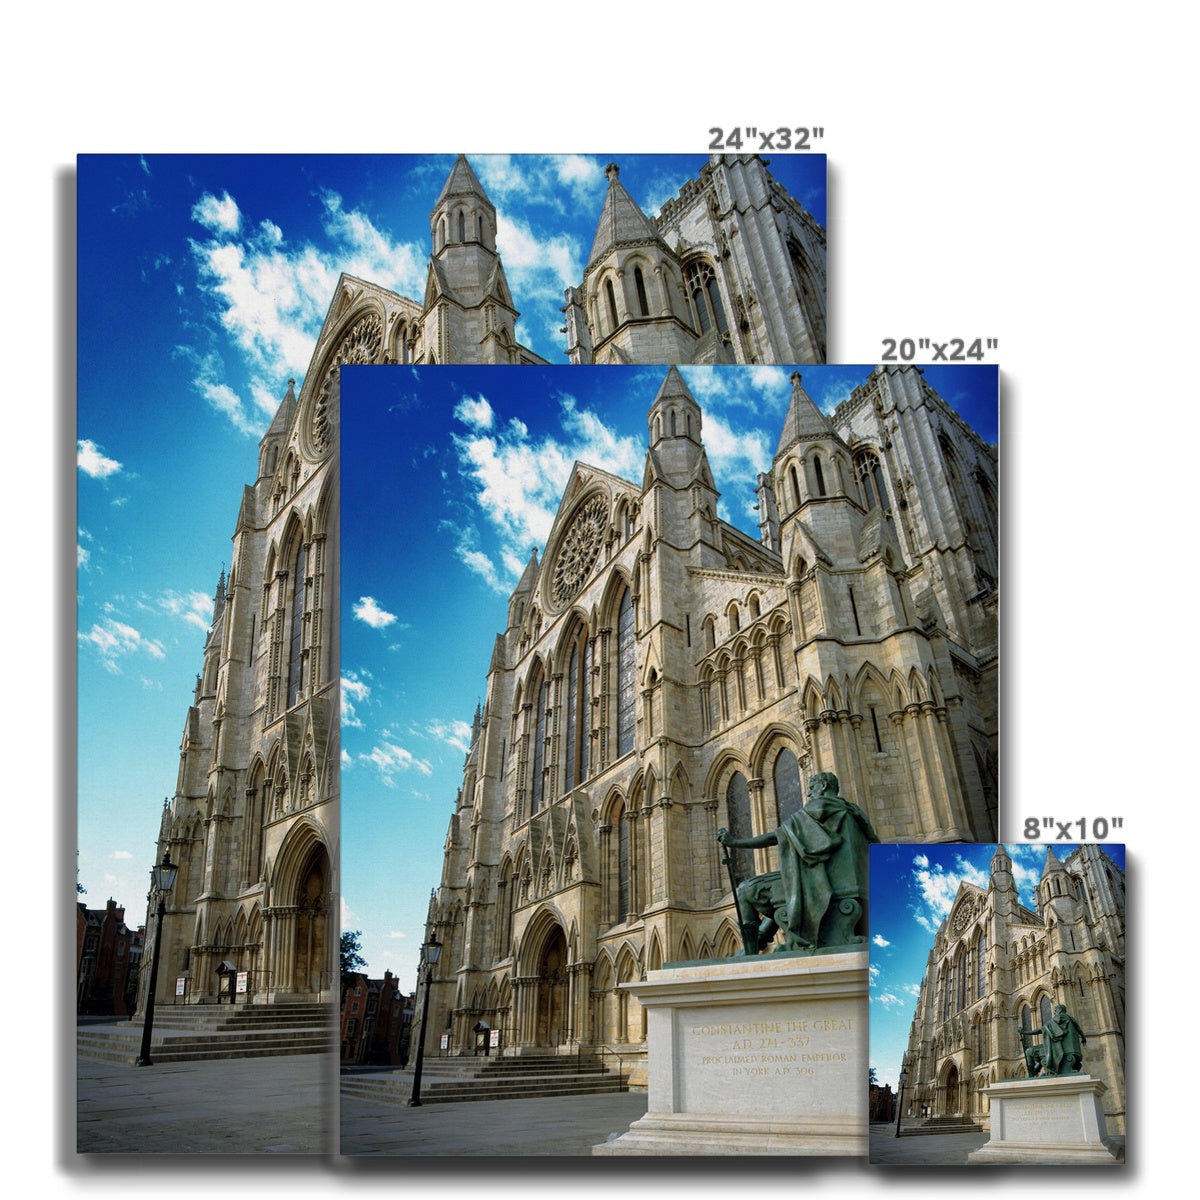 York Minster's South façade with the statue of Constantine in the foreground. North Yorkshire, UK Canvas